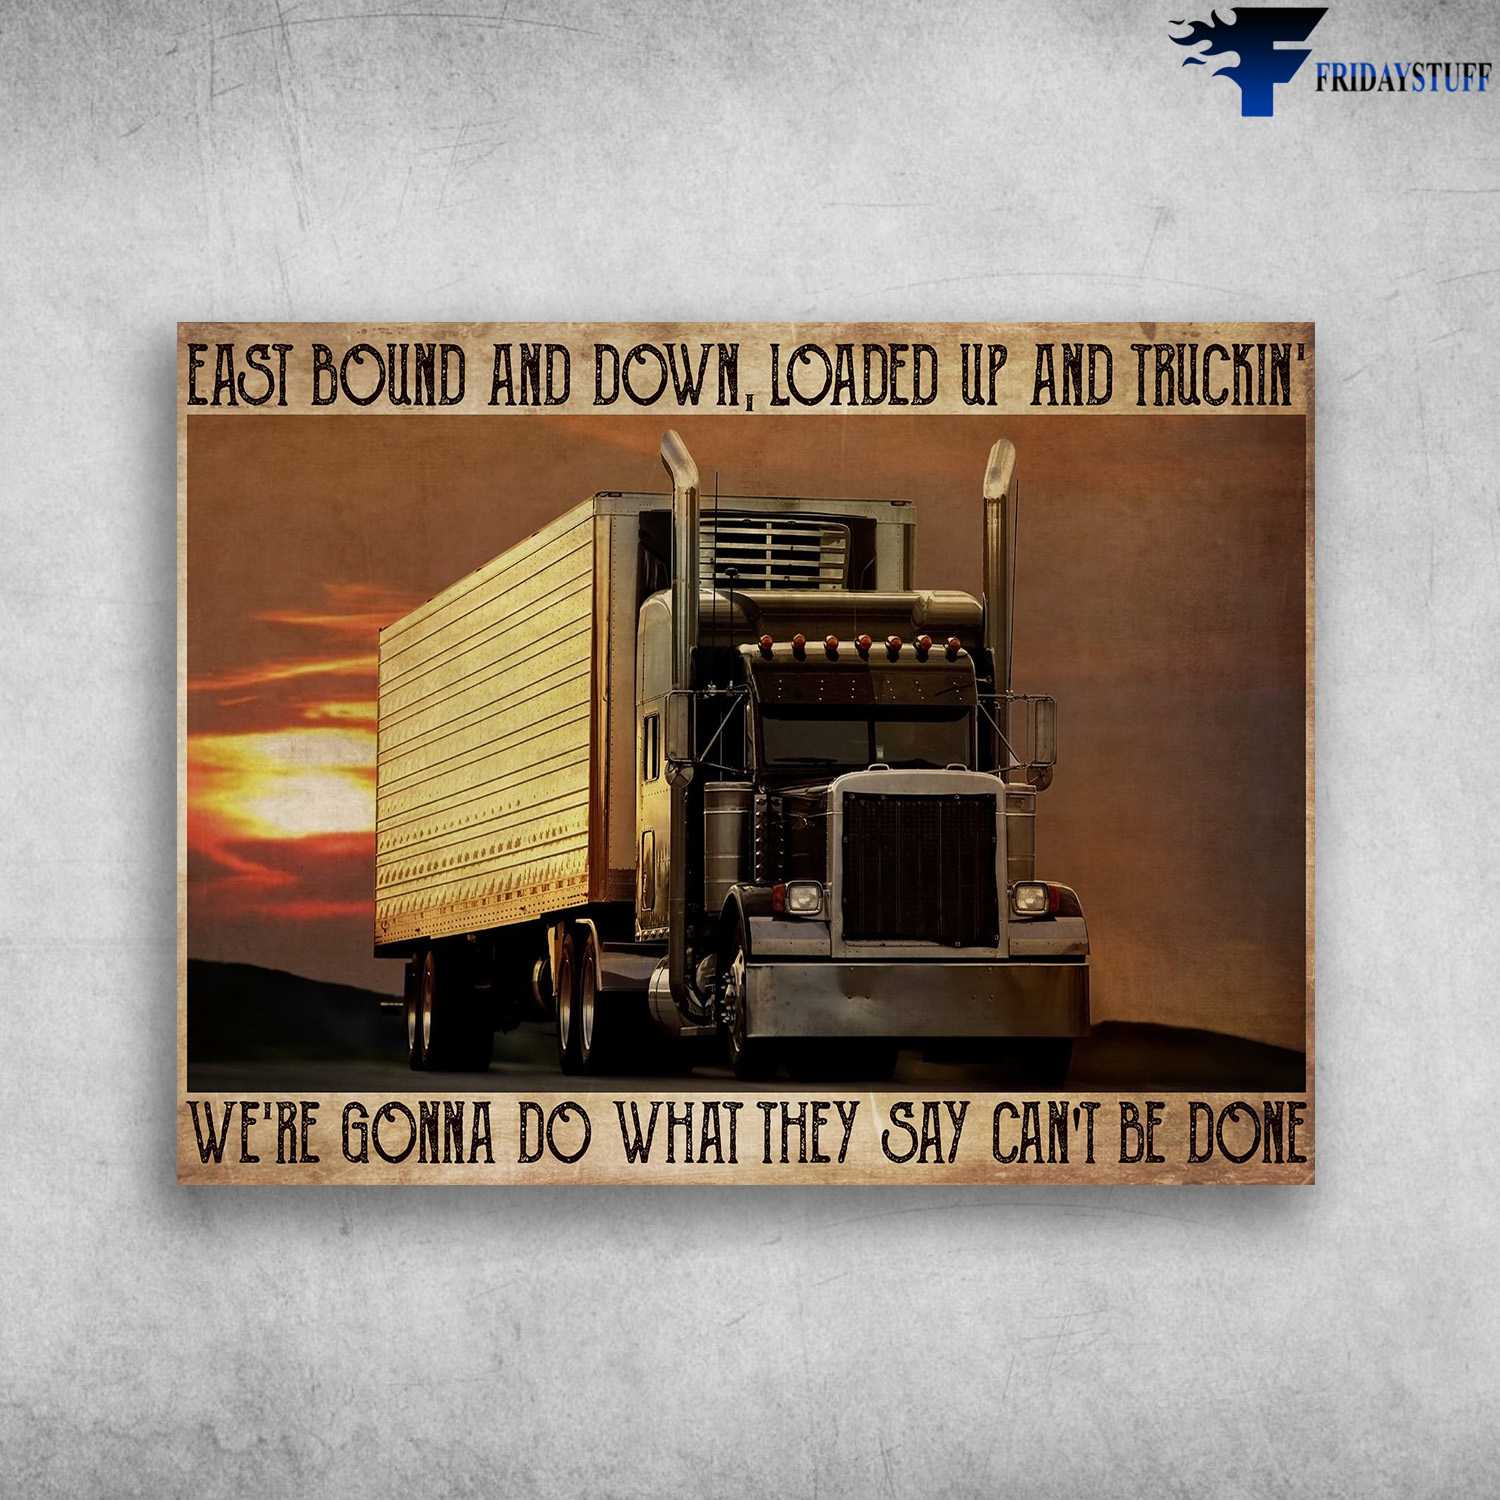 Trucker Poster, Truck Driver - East Bound And Down, Loaded Up And Truckin, We're Gonna Do What They Say, Can't Be Done